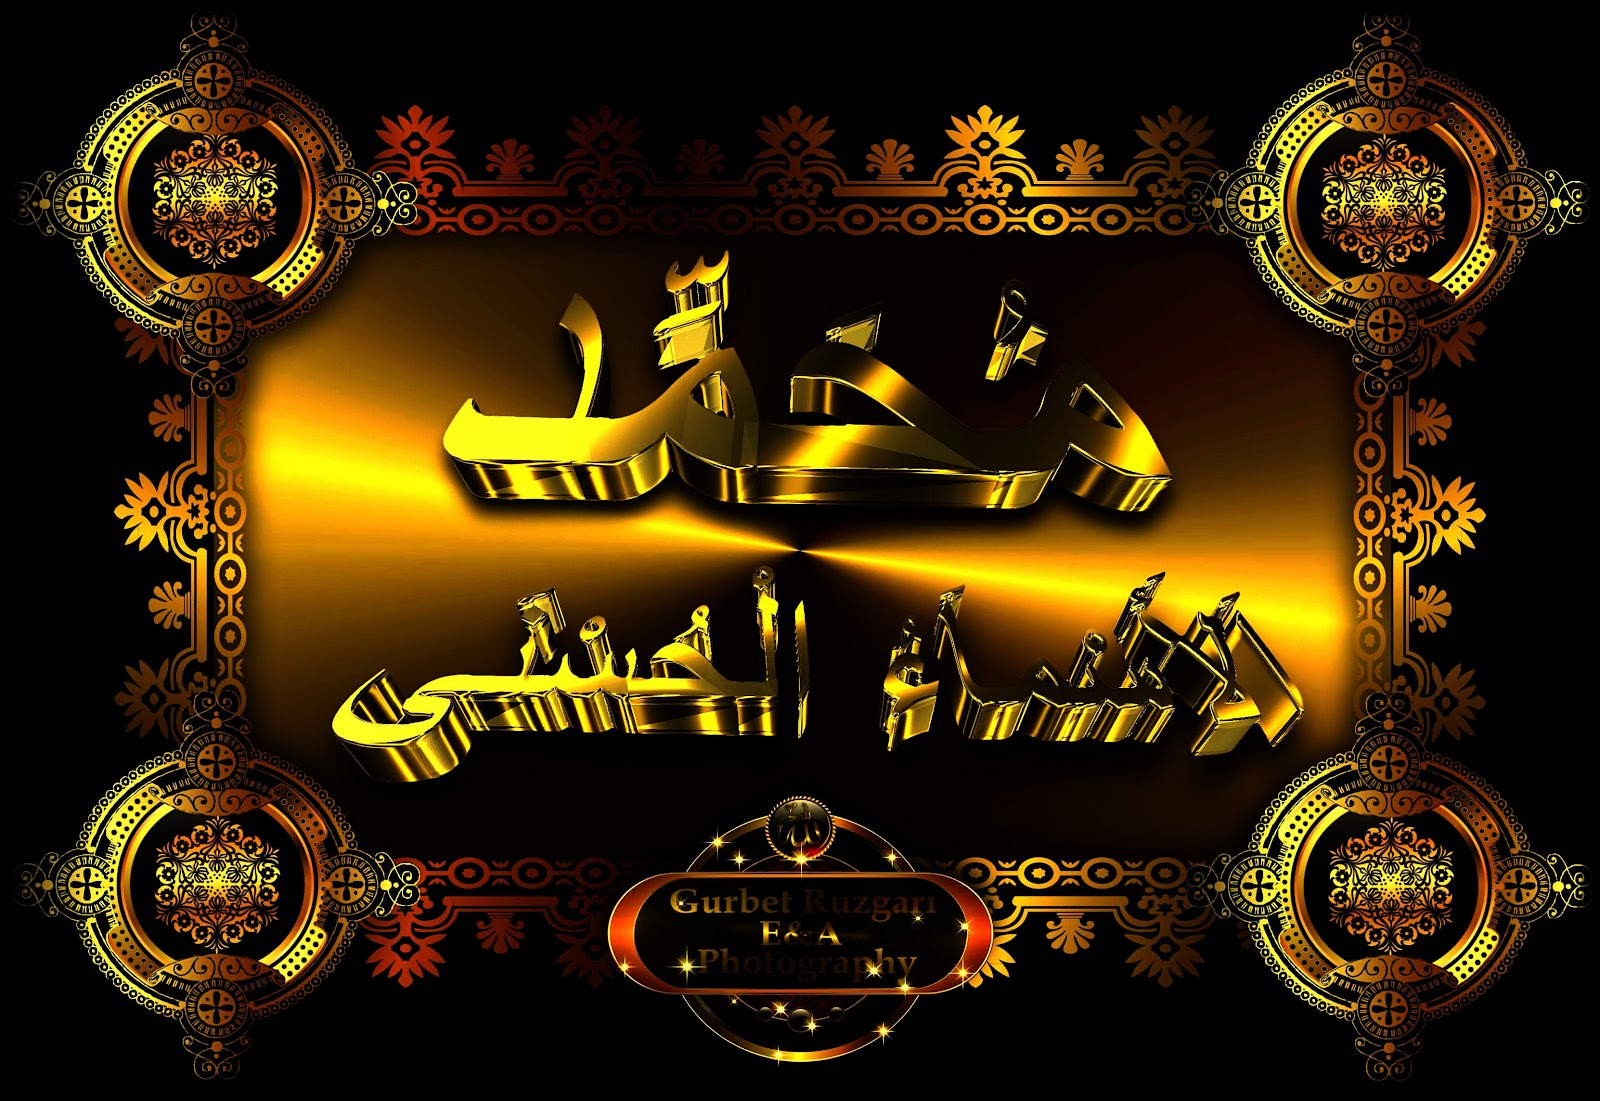 ... hz+allah+cc+___+hz+muhammed+pictures+_islamic+wallpapers-000_+%282%29